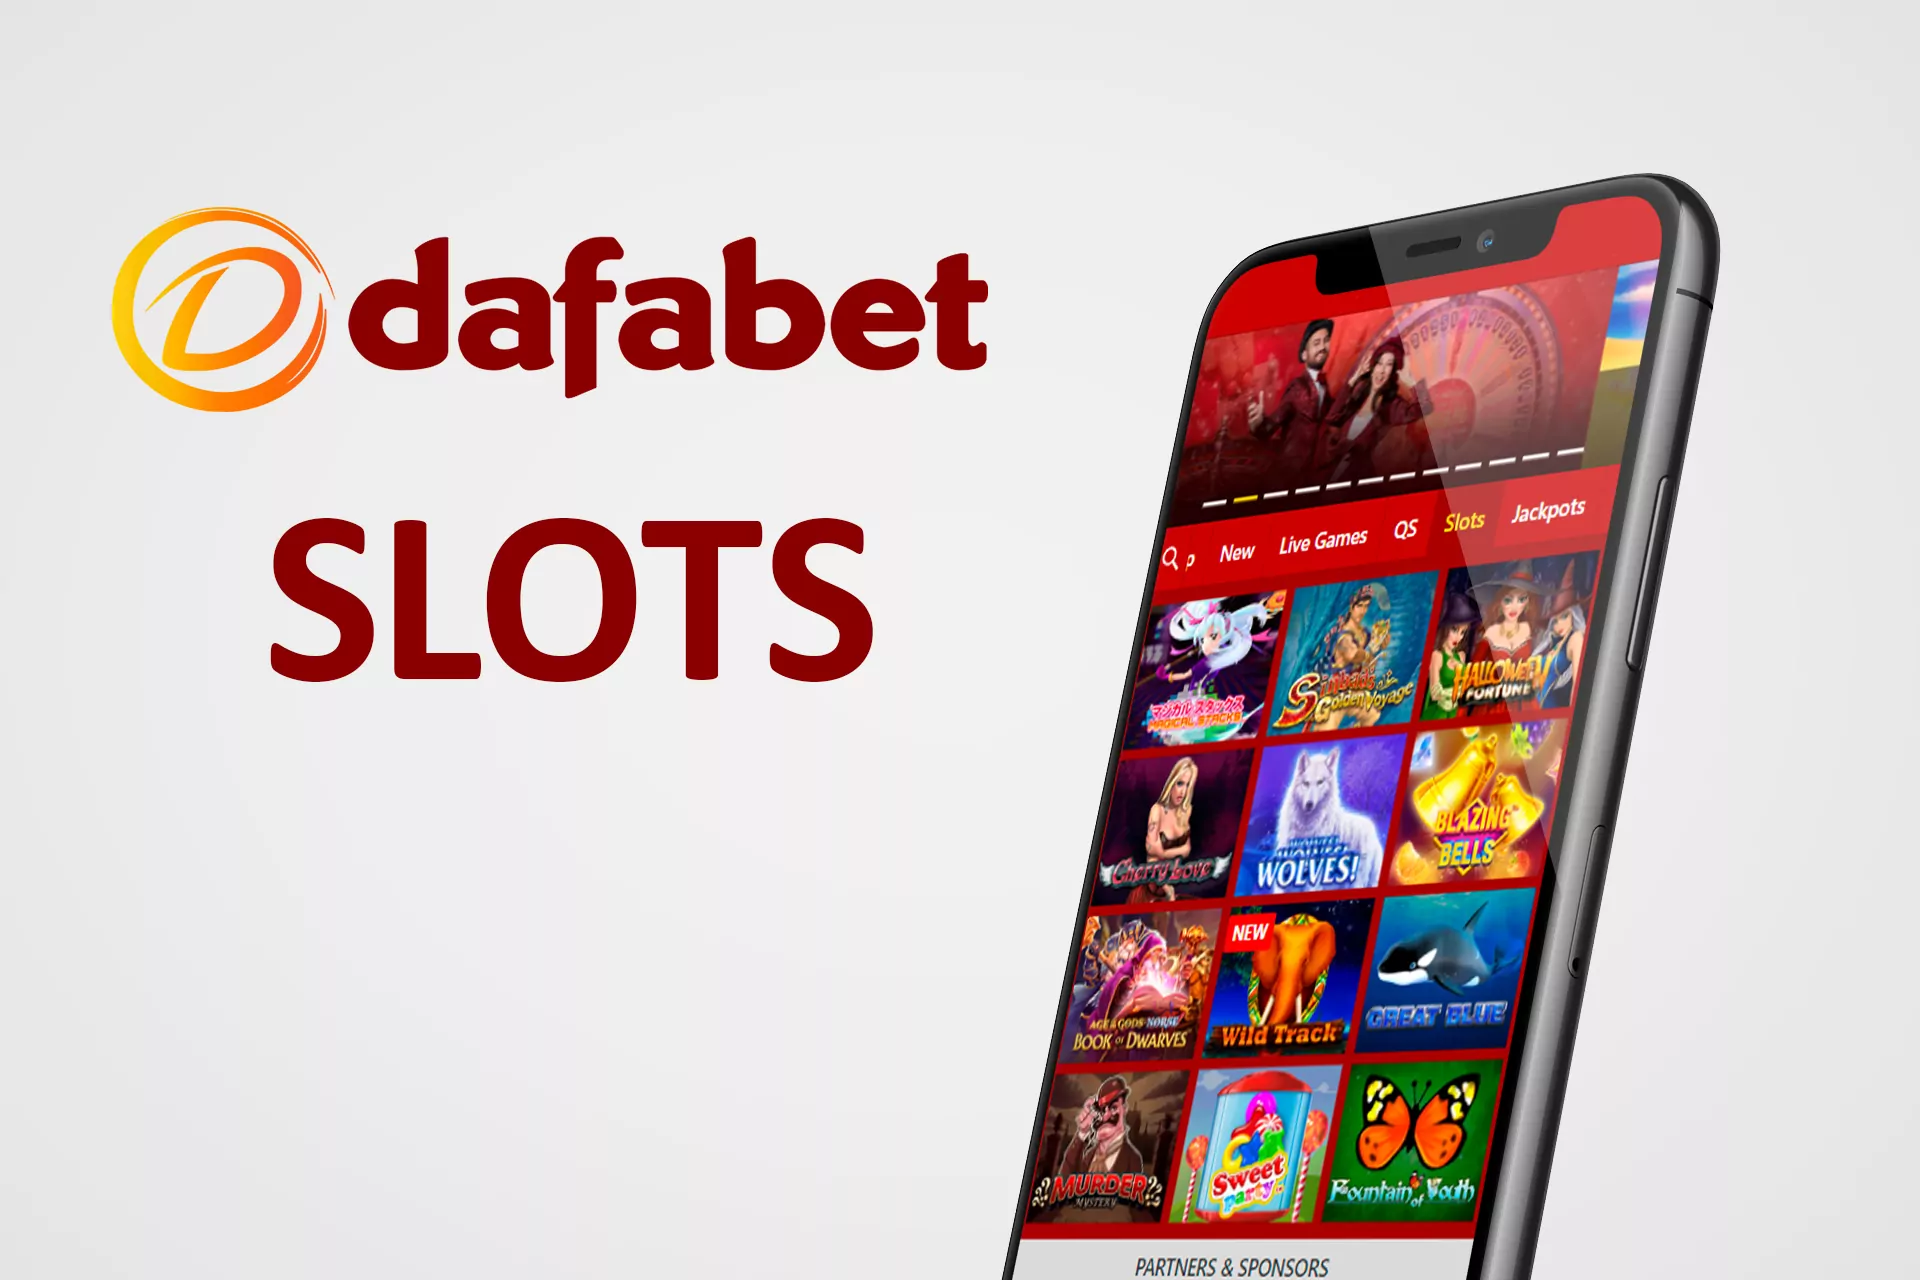 Play slots in your mobile Dafabet casino.